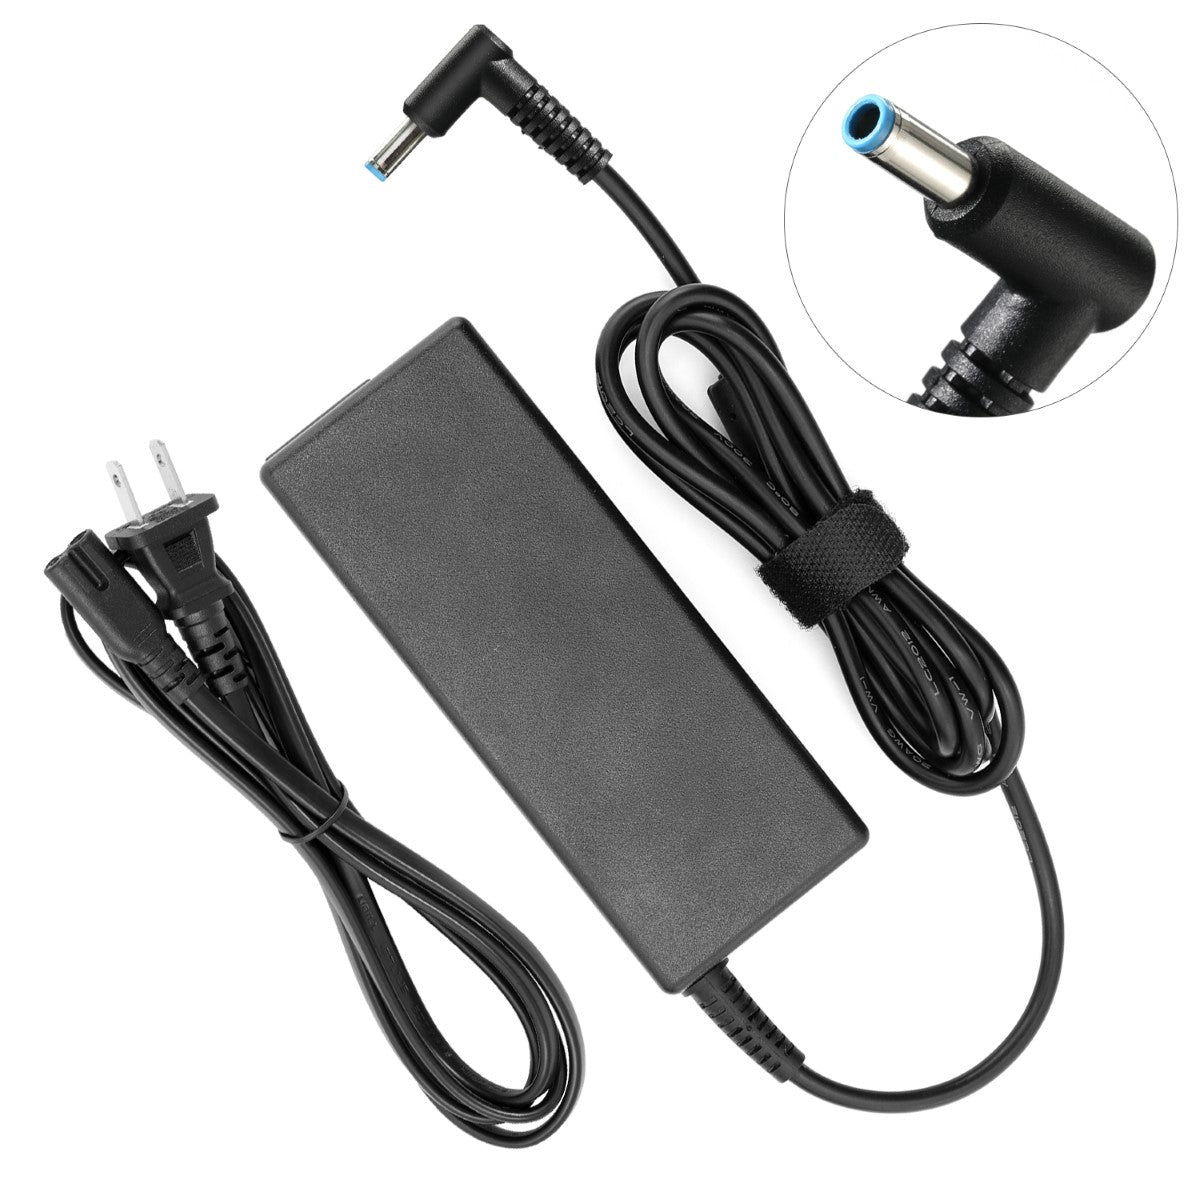 AC Adapter Charger for HP Chromebook 14-ak013dx Notebook.